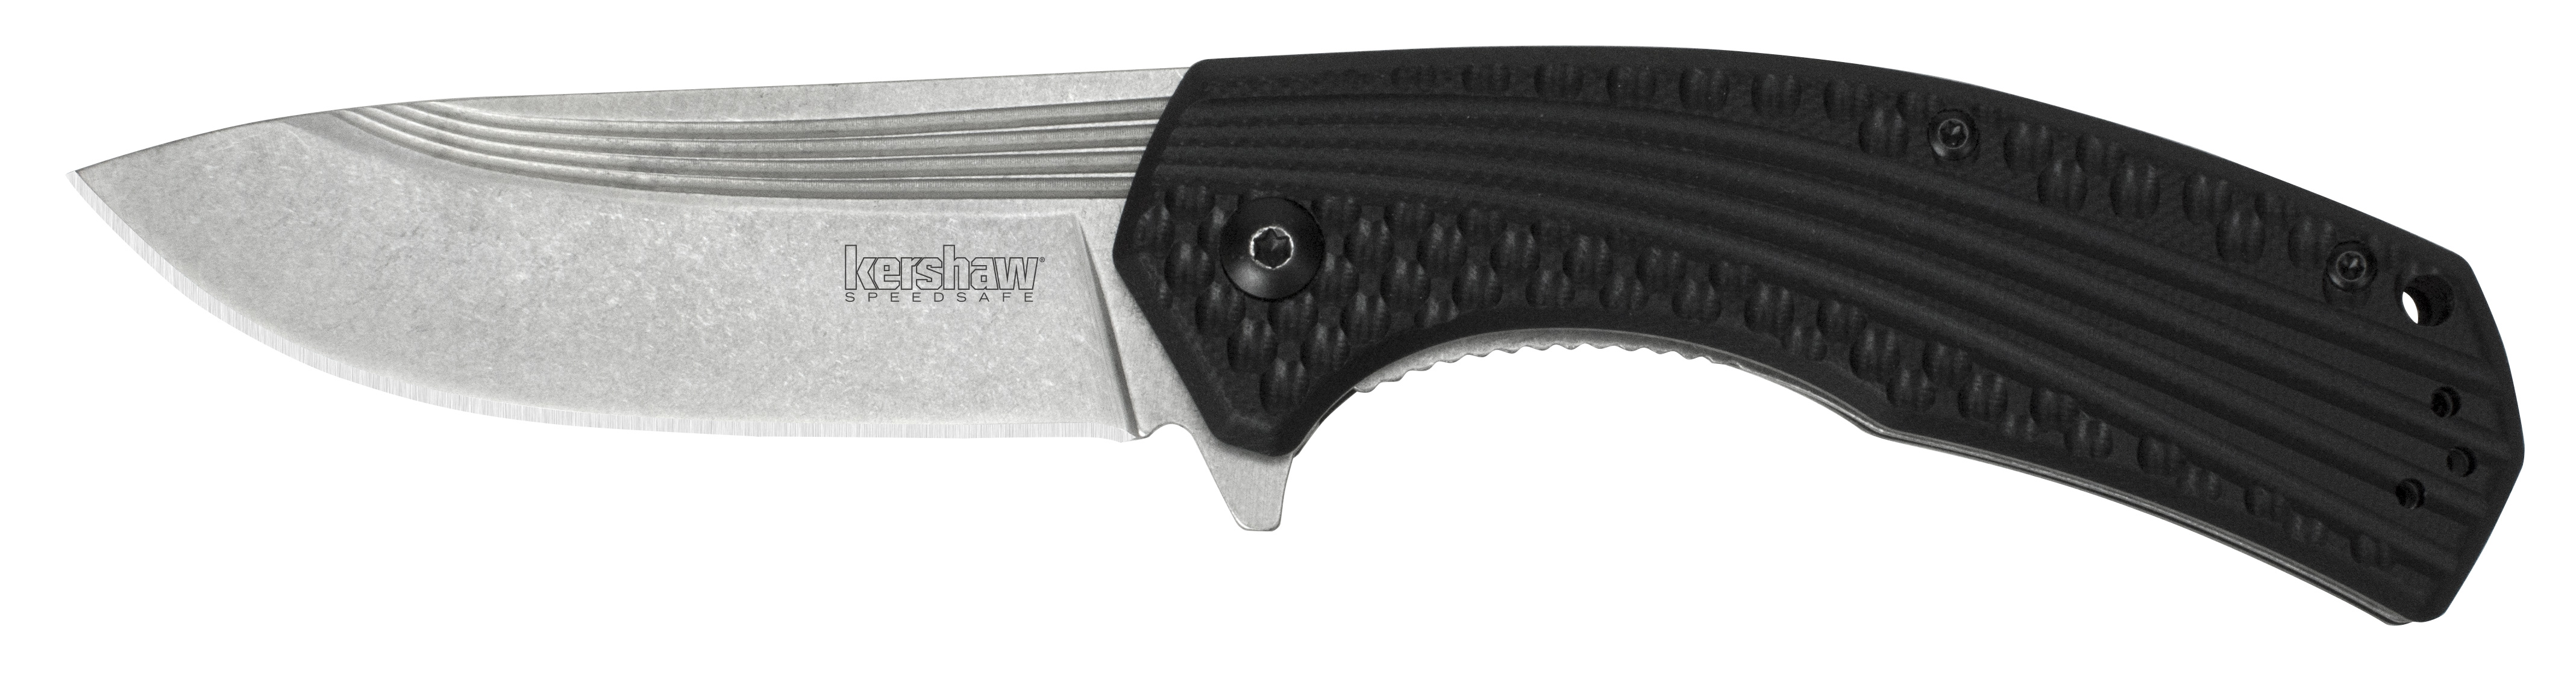 Kershaw Knives Flow Folding Knife | 45% Off 5 Star Rating Free Shipping over $49!